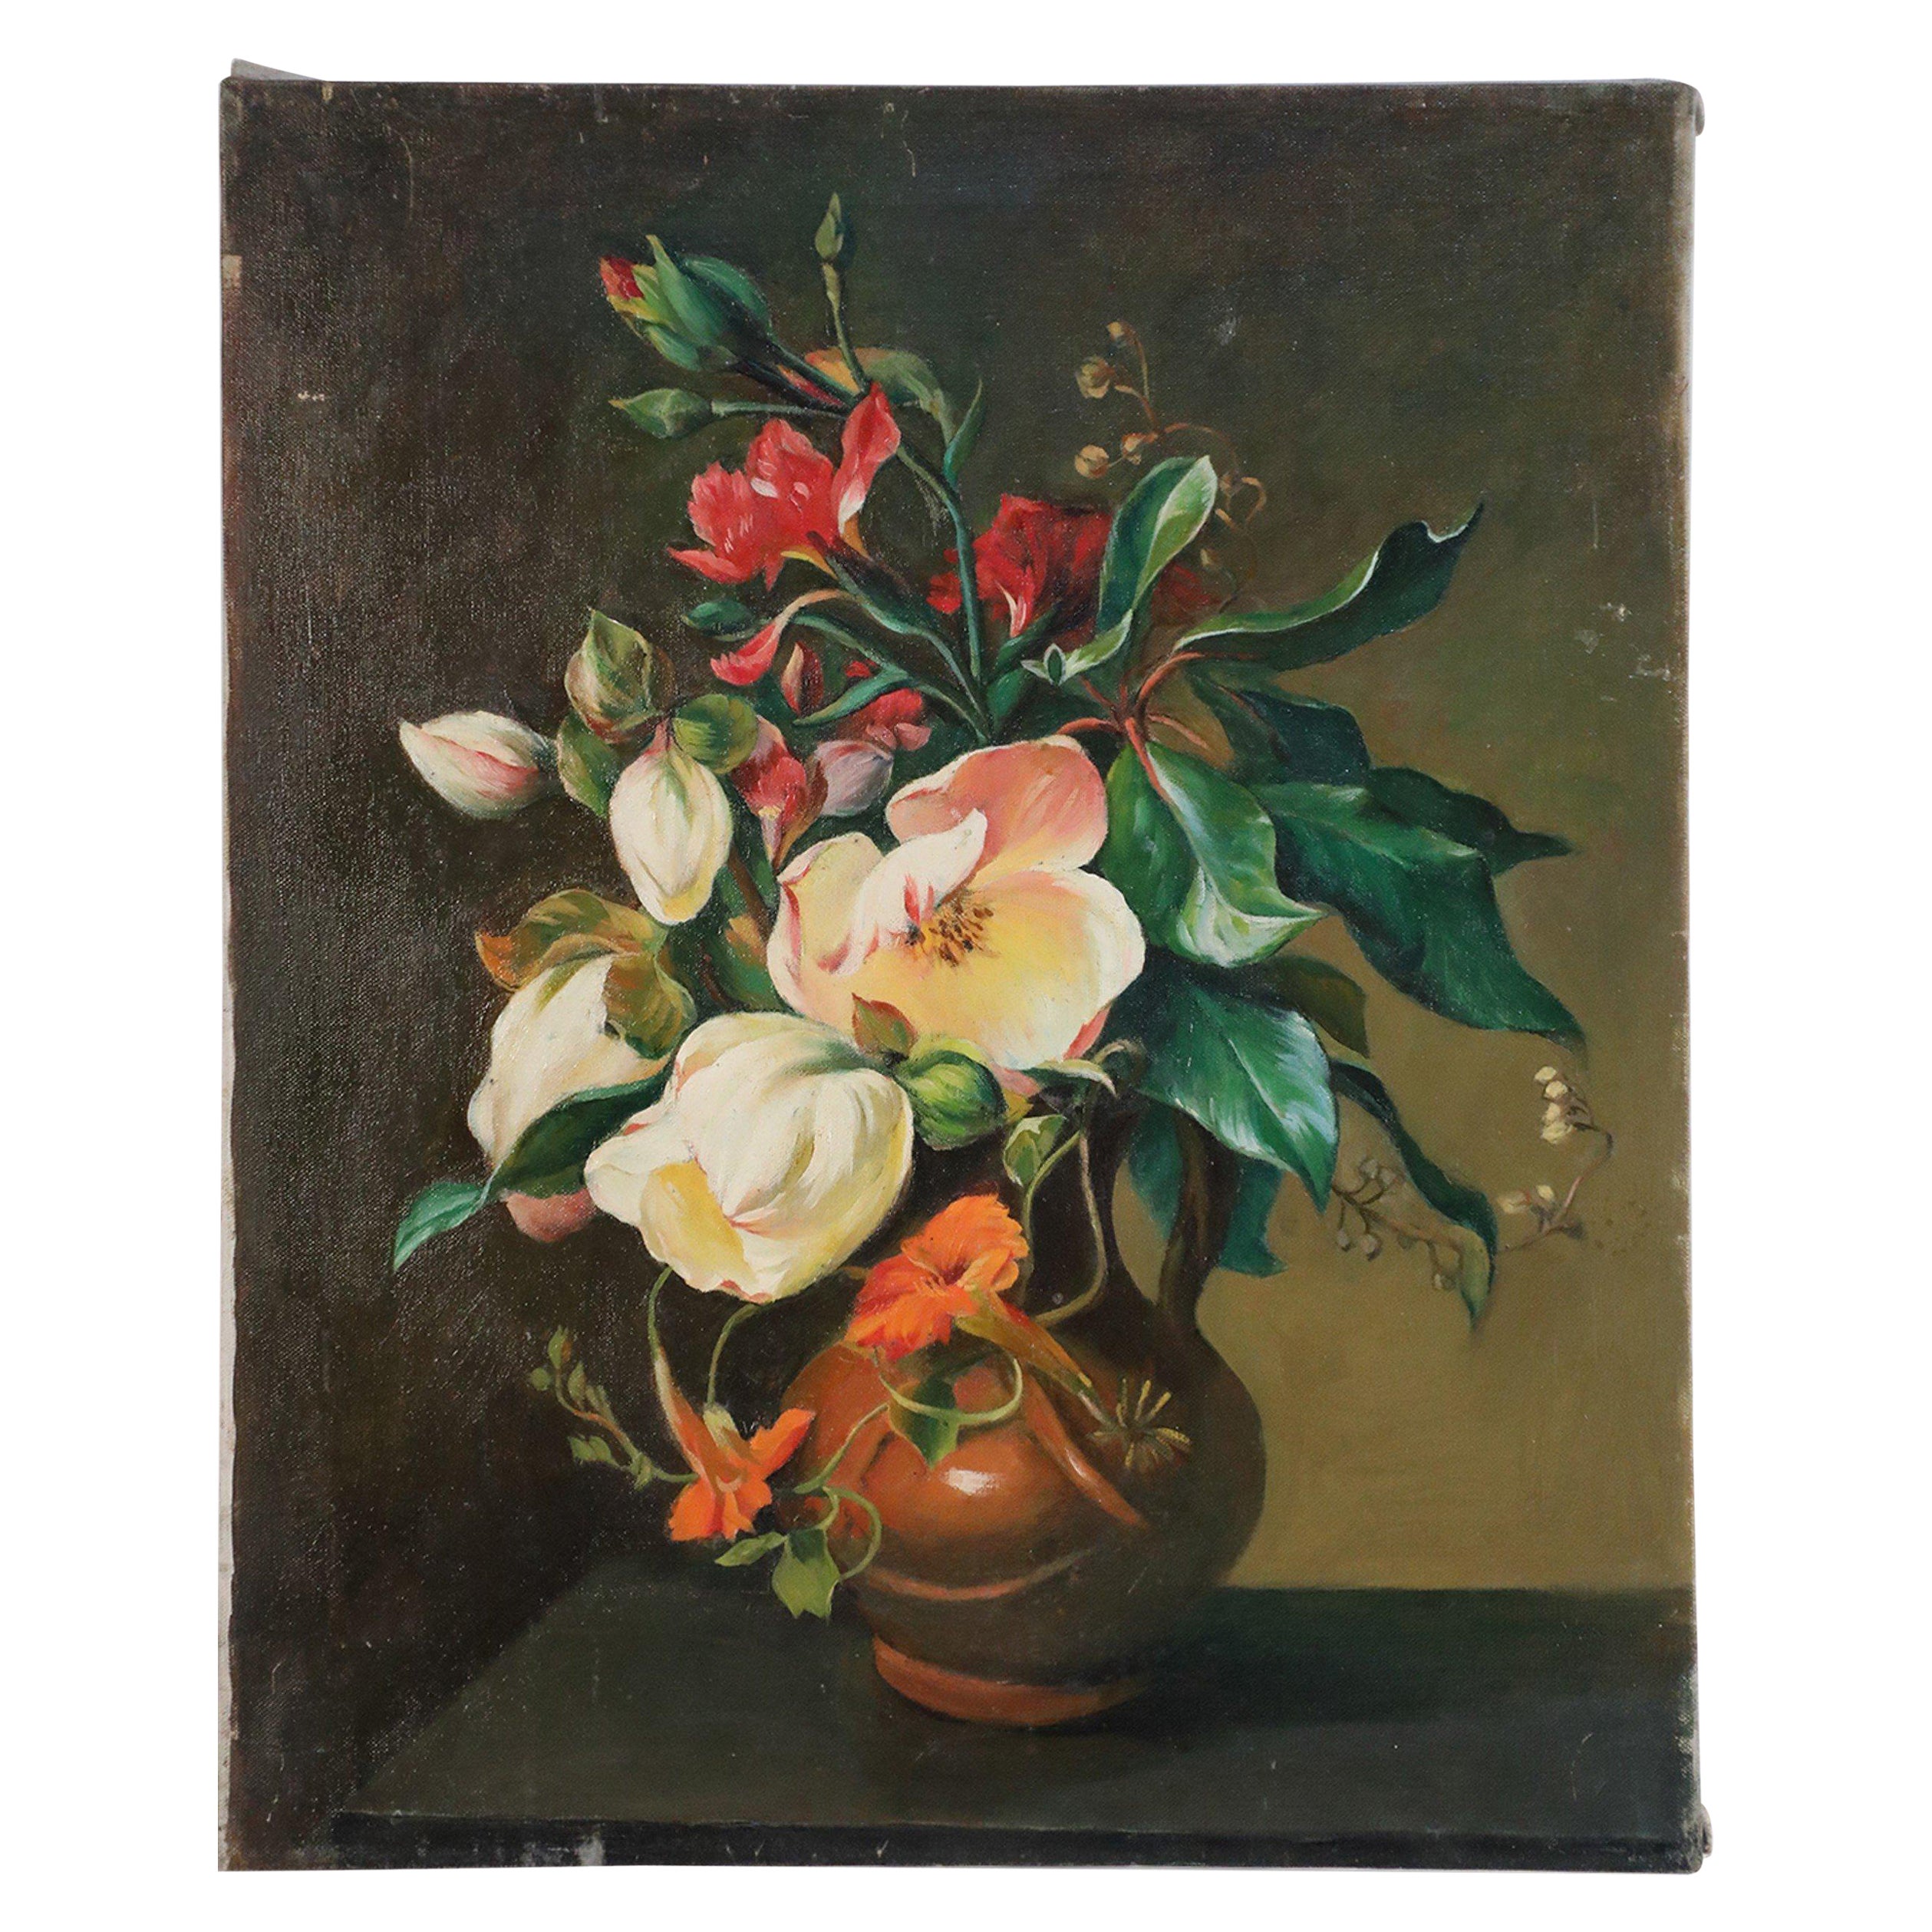 White and Pink Floral Arrangement Still Life Painting on Canvas